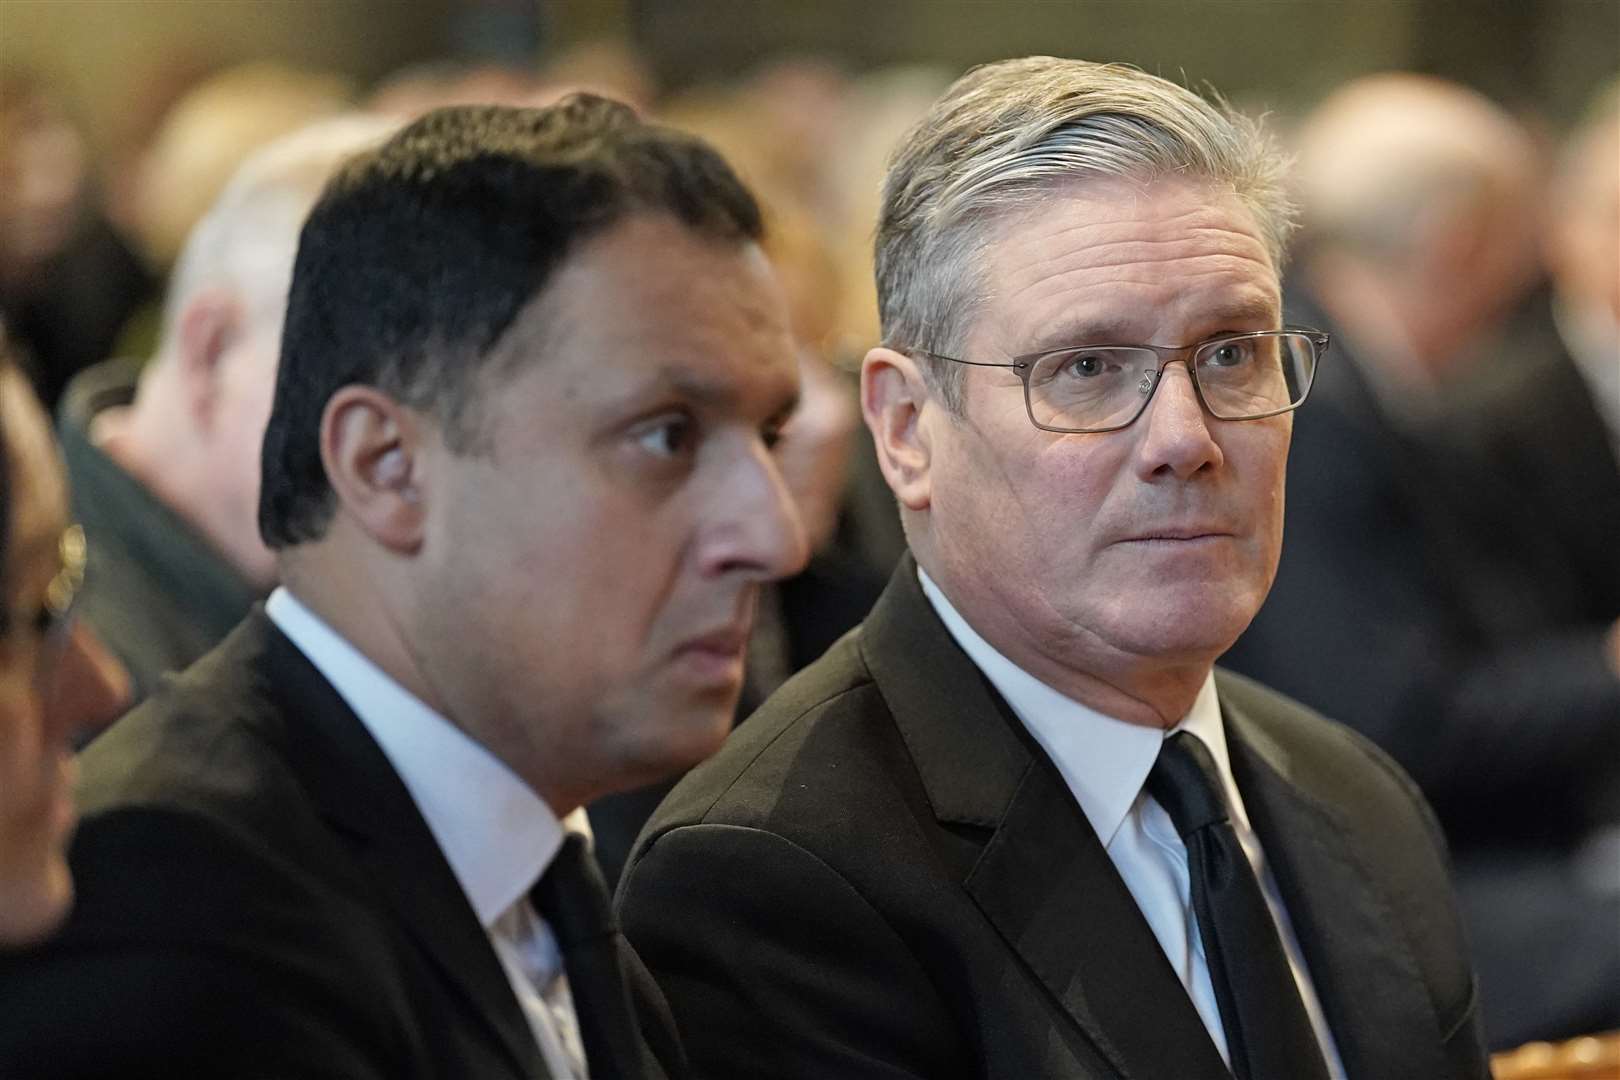 Labour leader Sir Keir Starmer, right, and Scottish leader Anas Sarwar were both at the service (Andrew Milligan/PA)